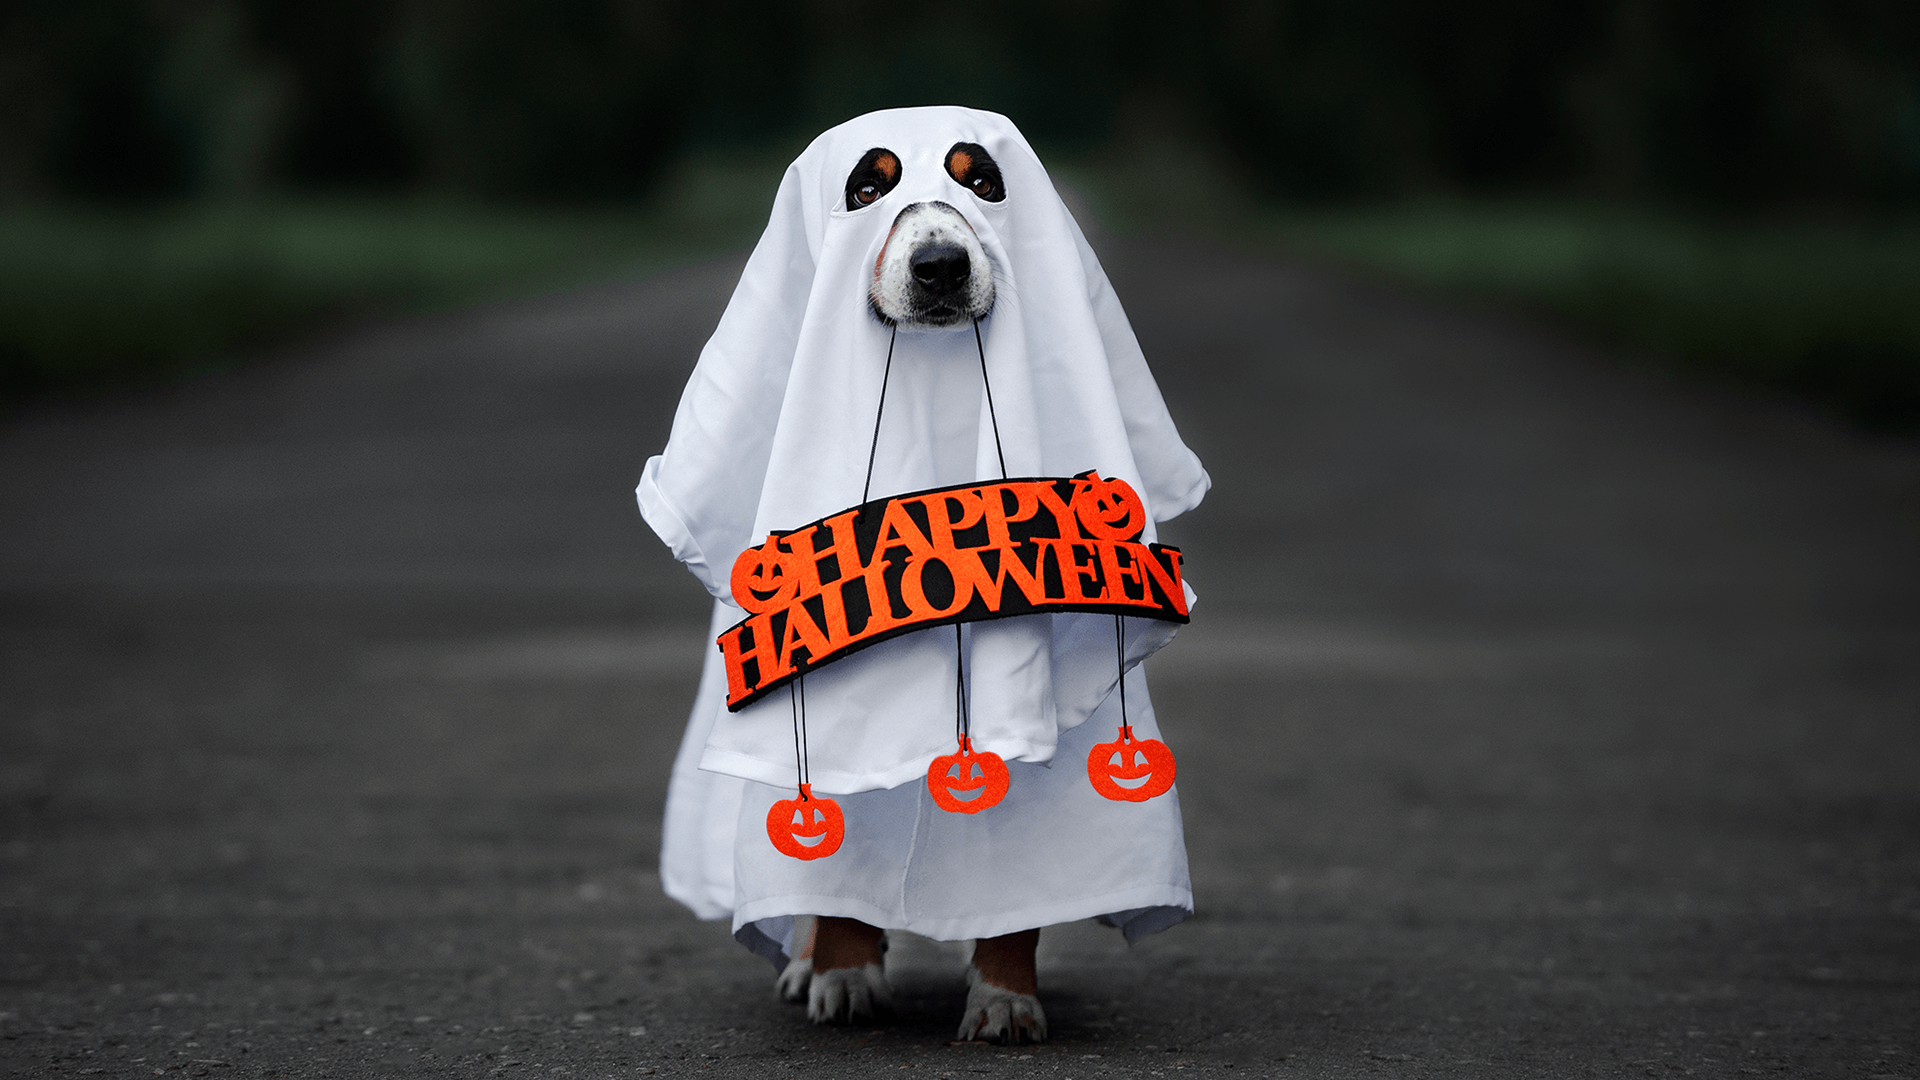 Dog in ghost costume holding happy halloween sign screensaver